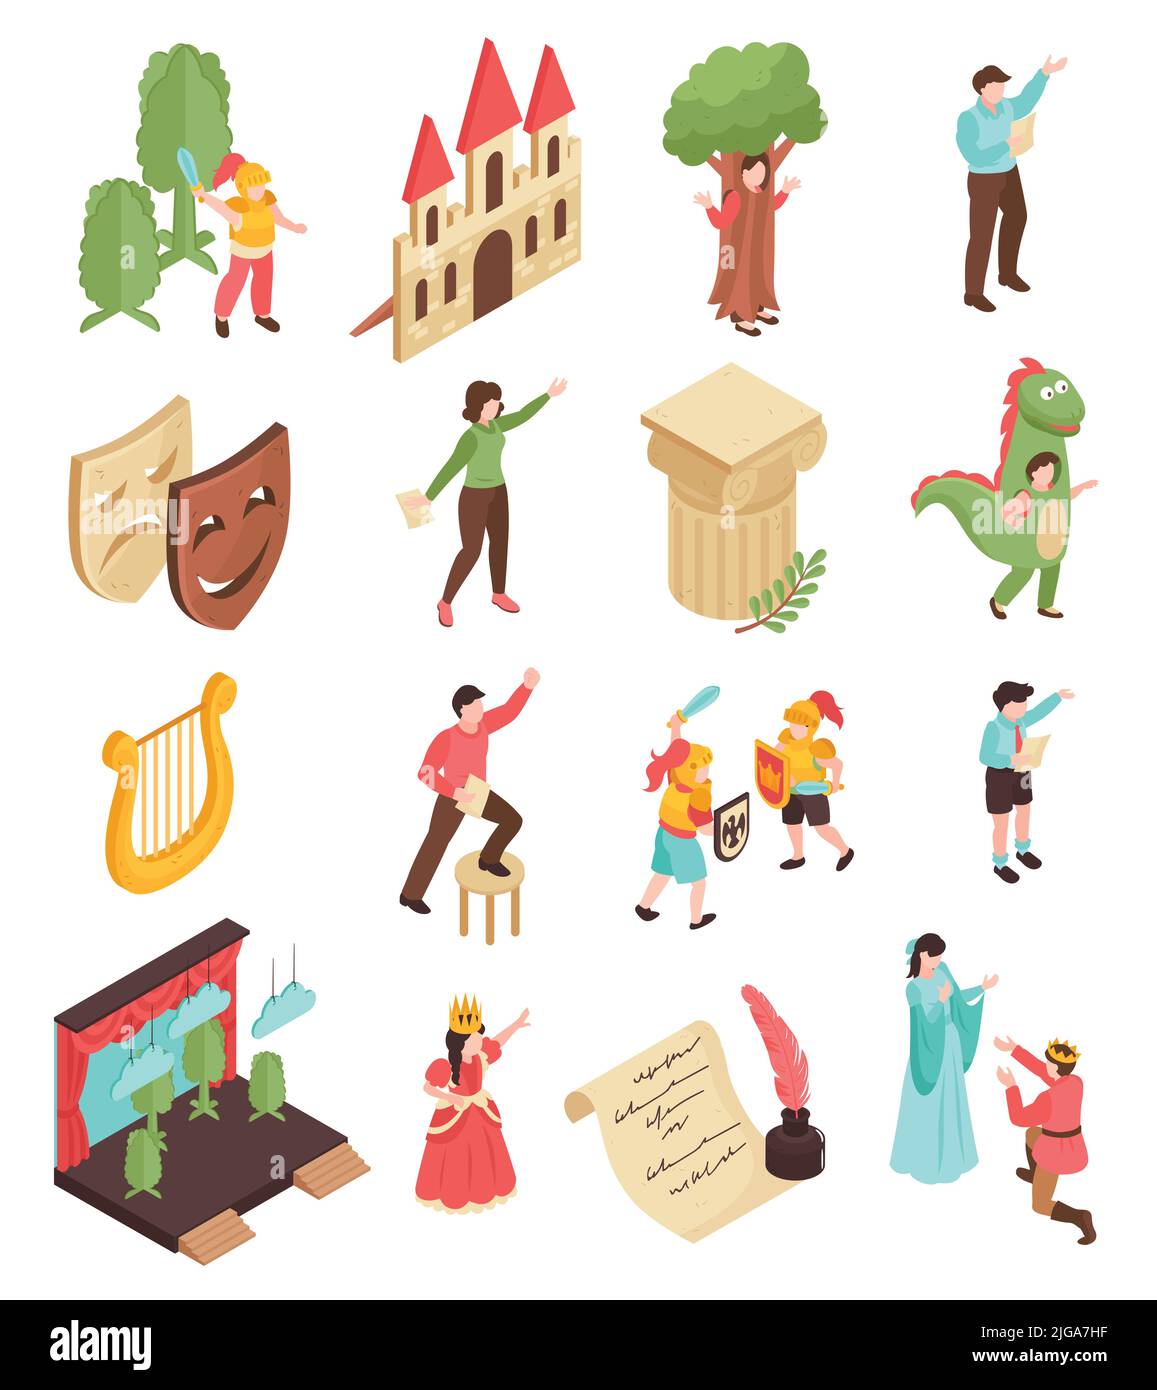 Acting school isometric icons set with drama classes students wearing costumes stage props isolated on white background 3d vector illustration Stock Vector